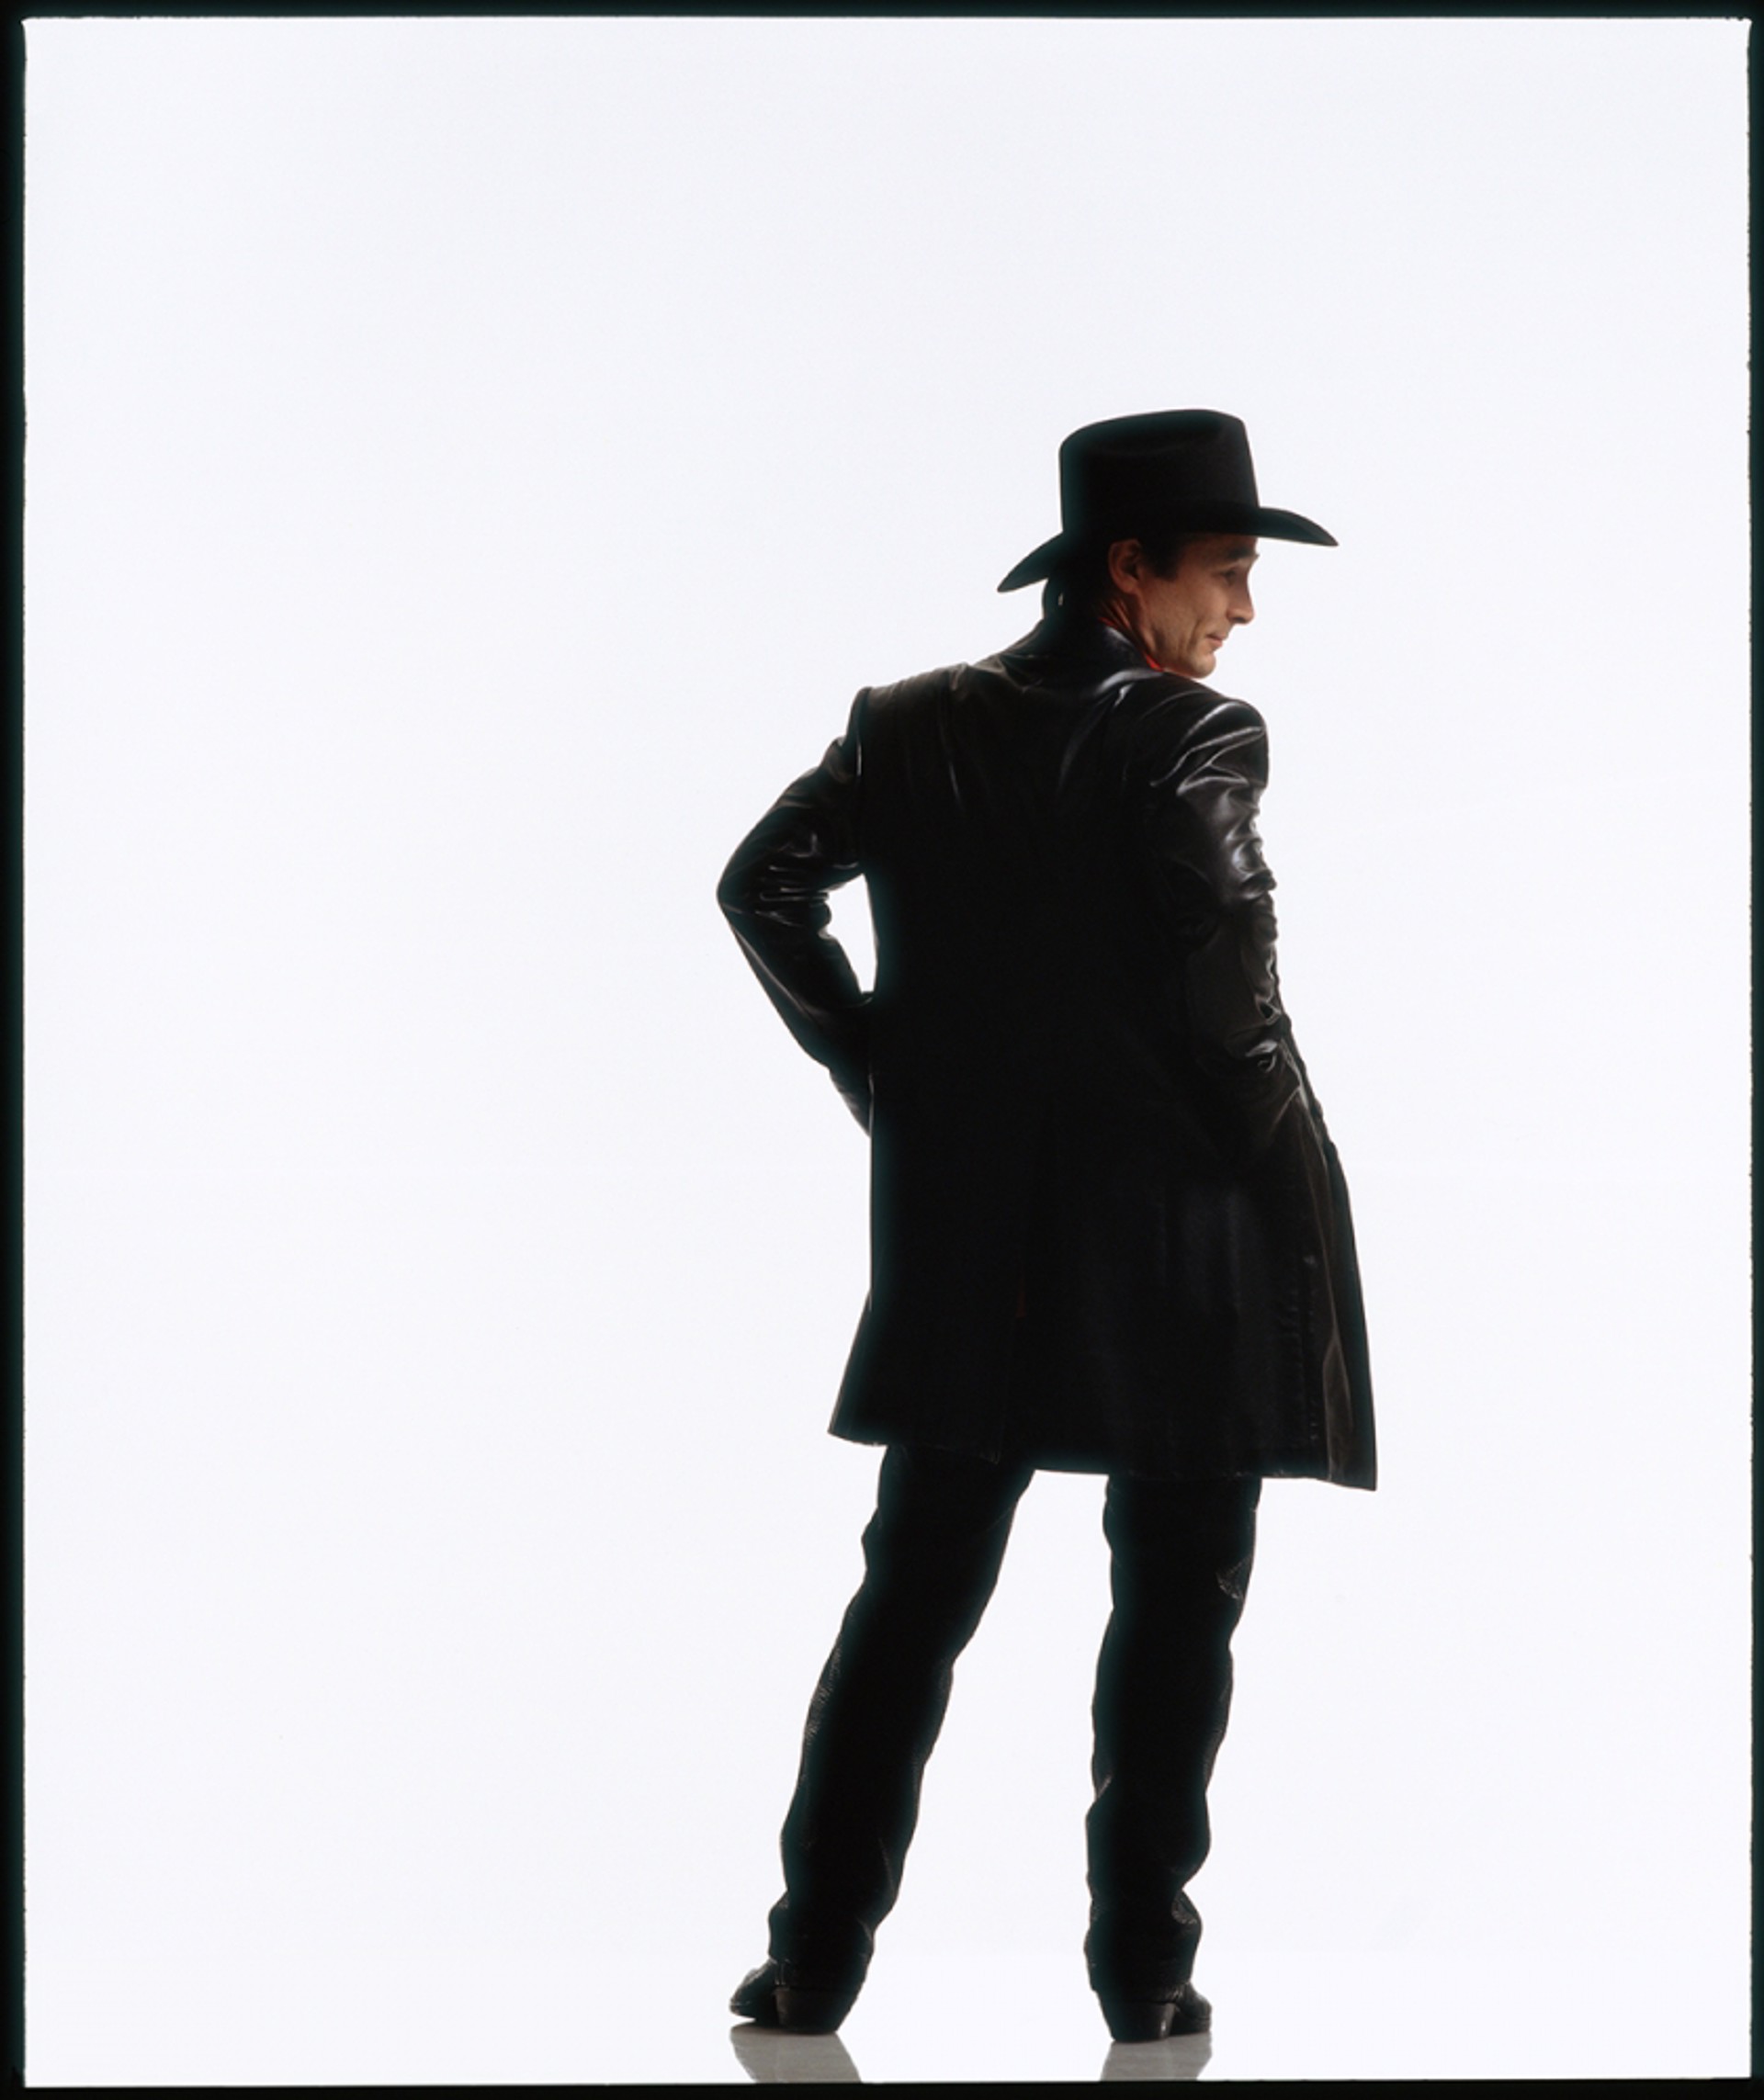 99039 Clint Black on White Seamless Color by Timothy White